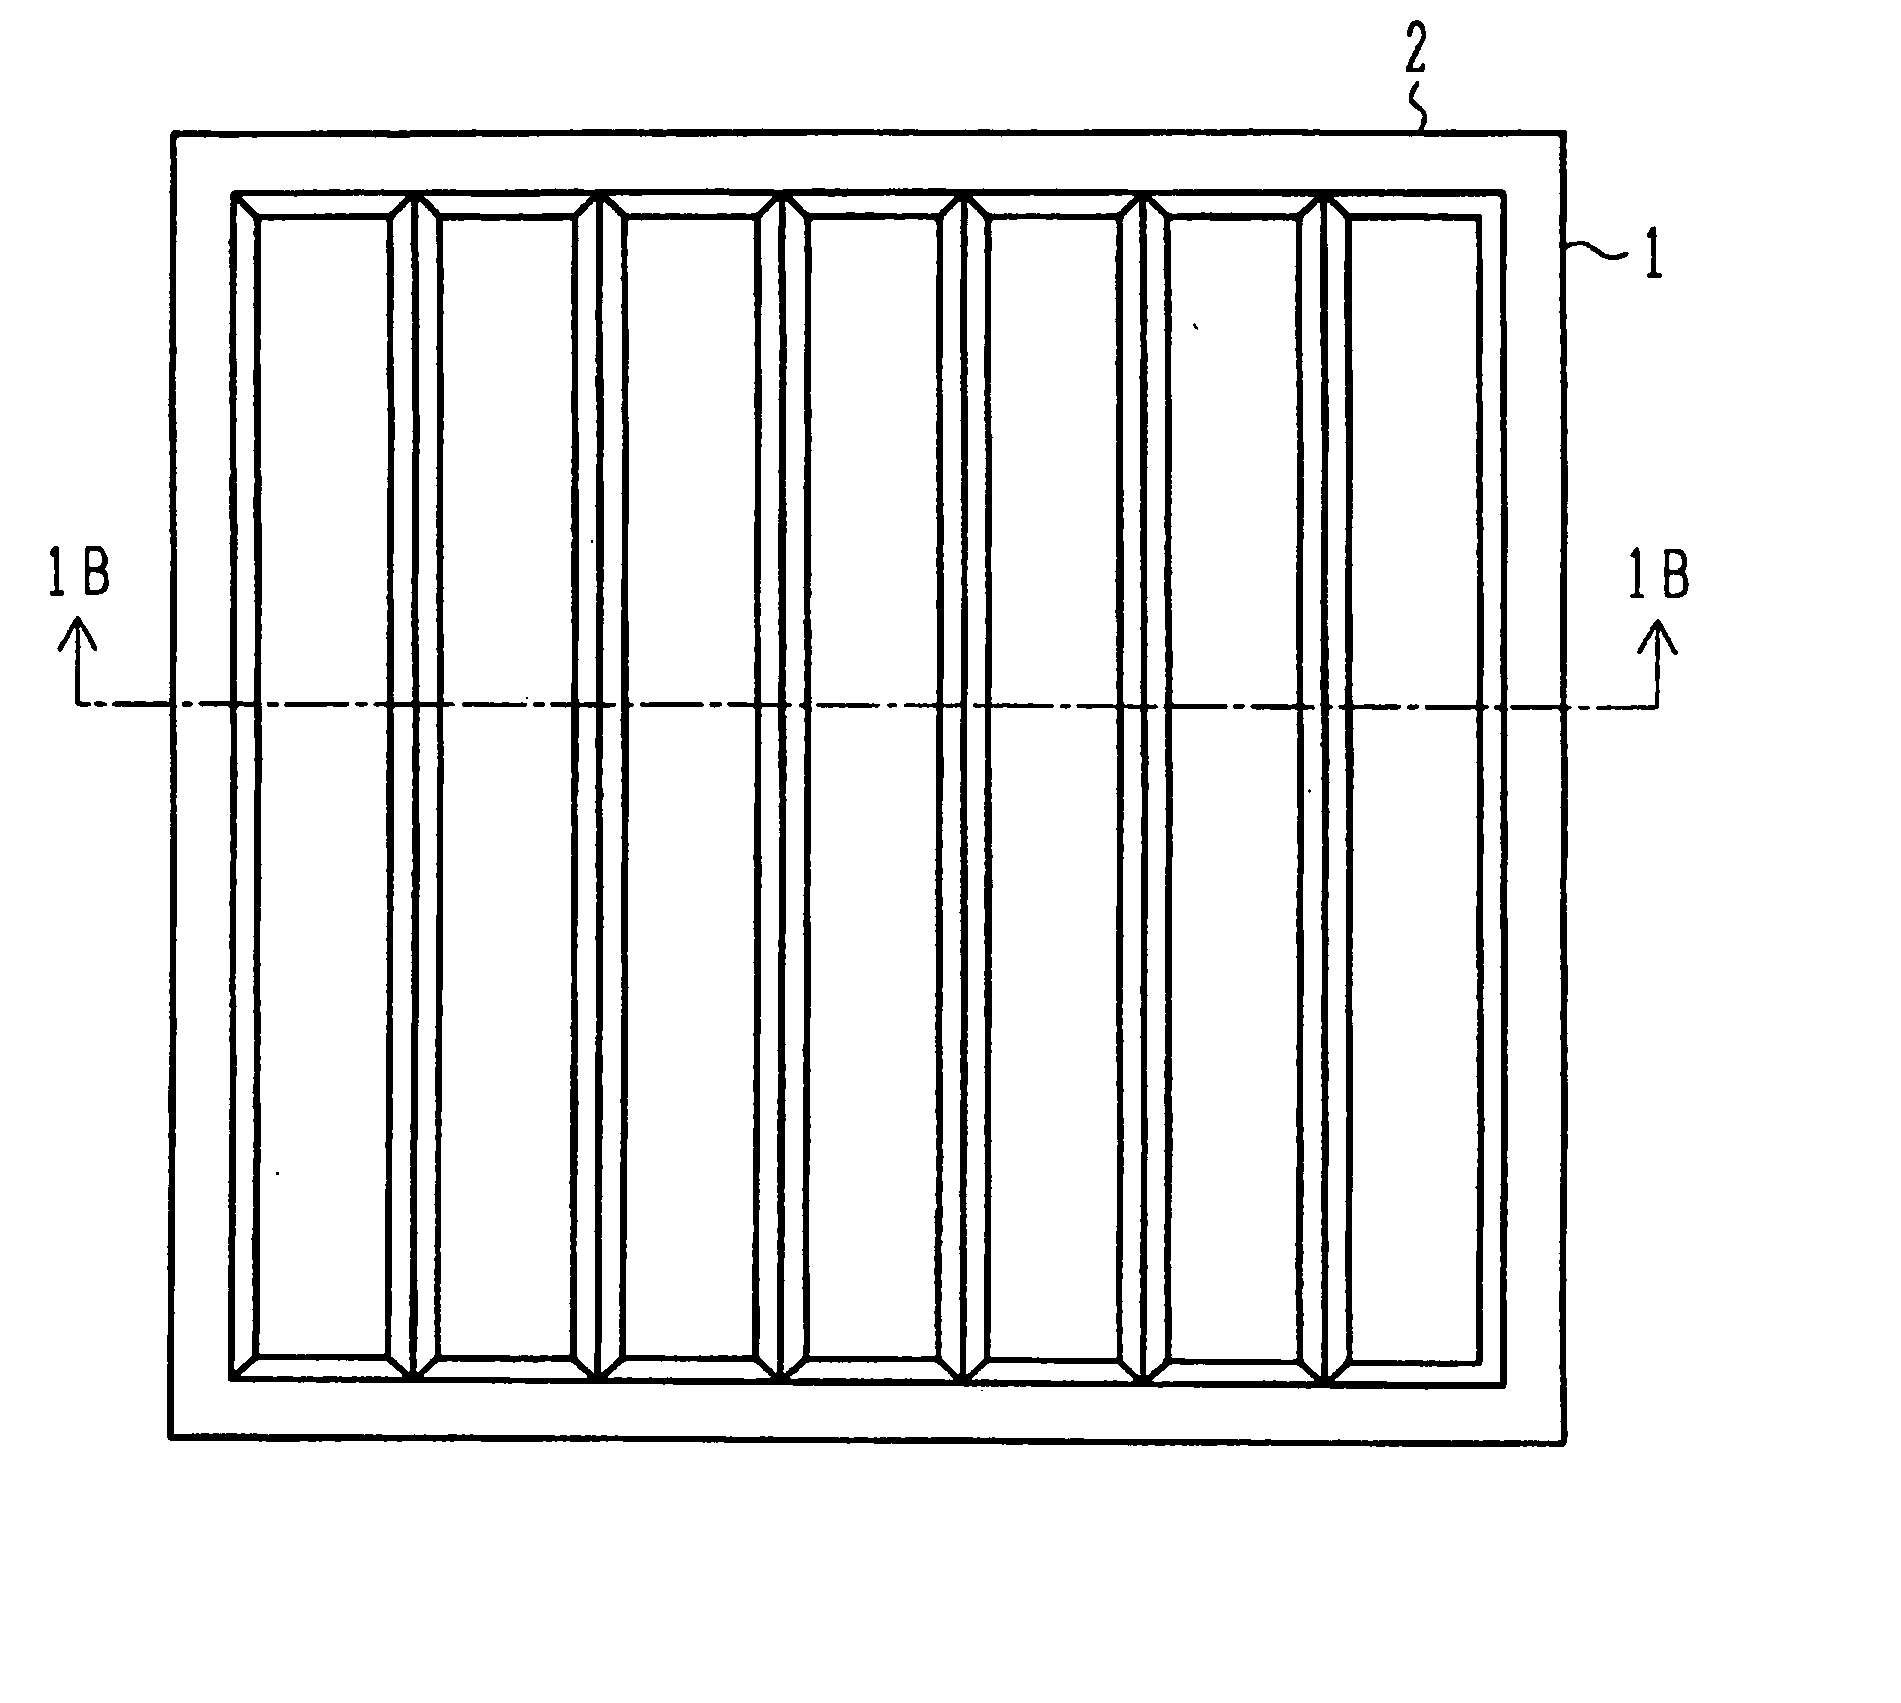 Flexible Base Material and Flexible Image-Displaying Device Resistant to Plastic Deformation